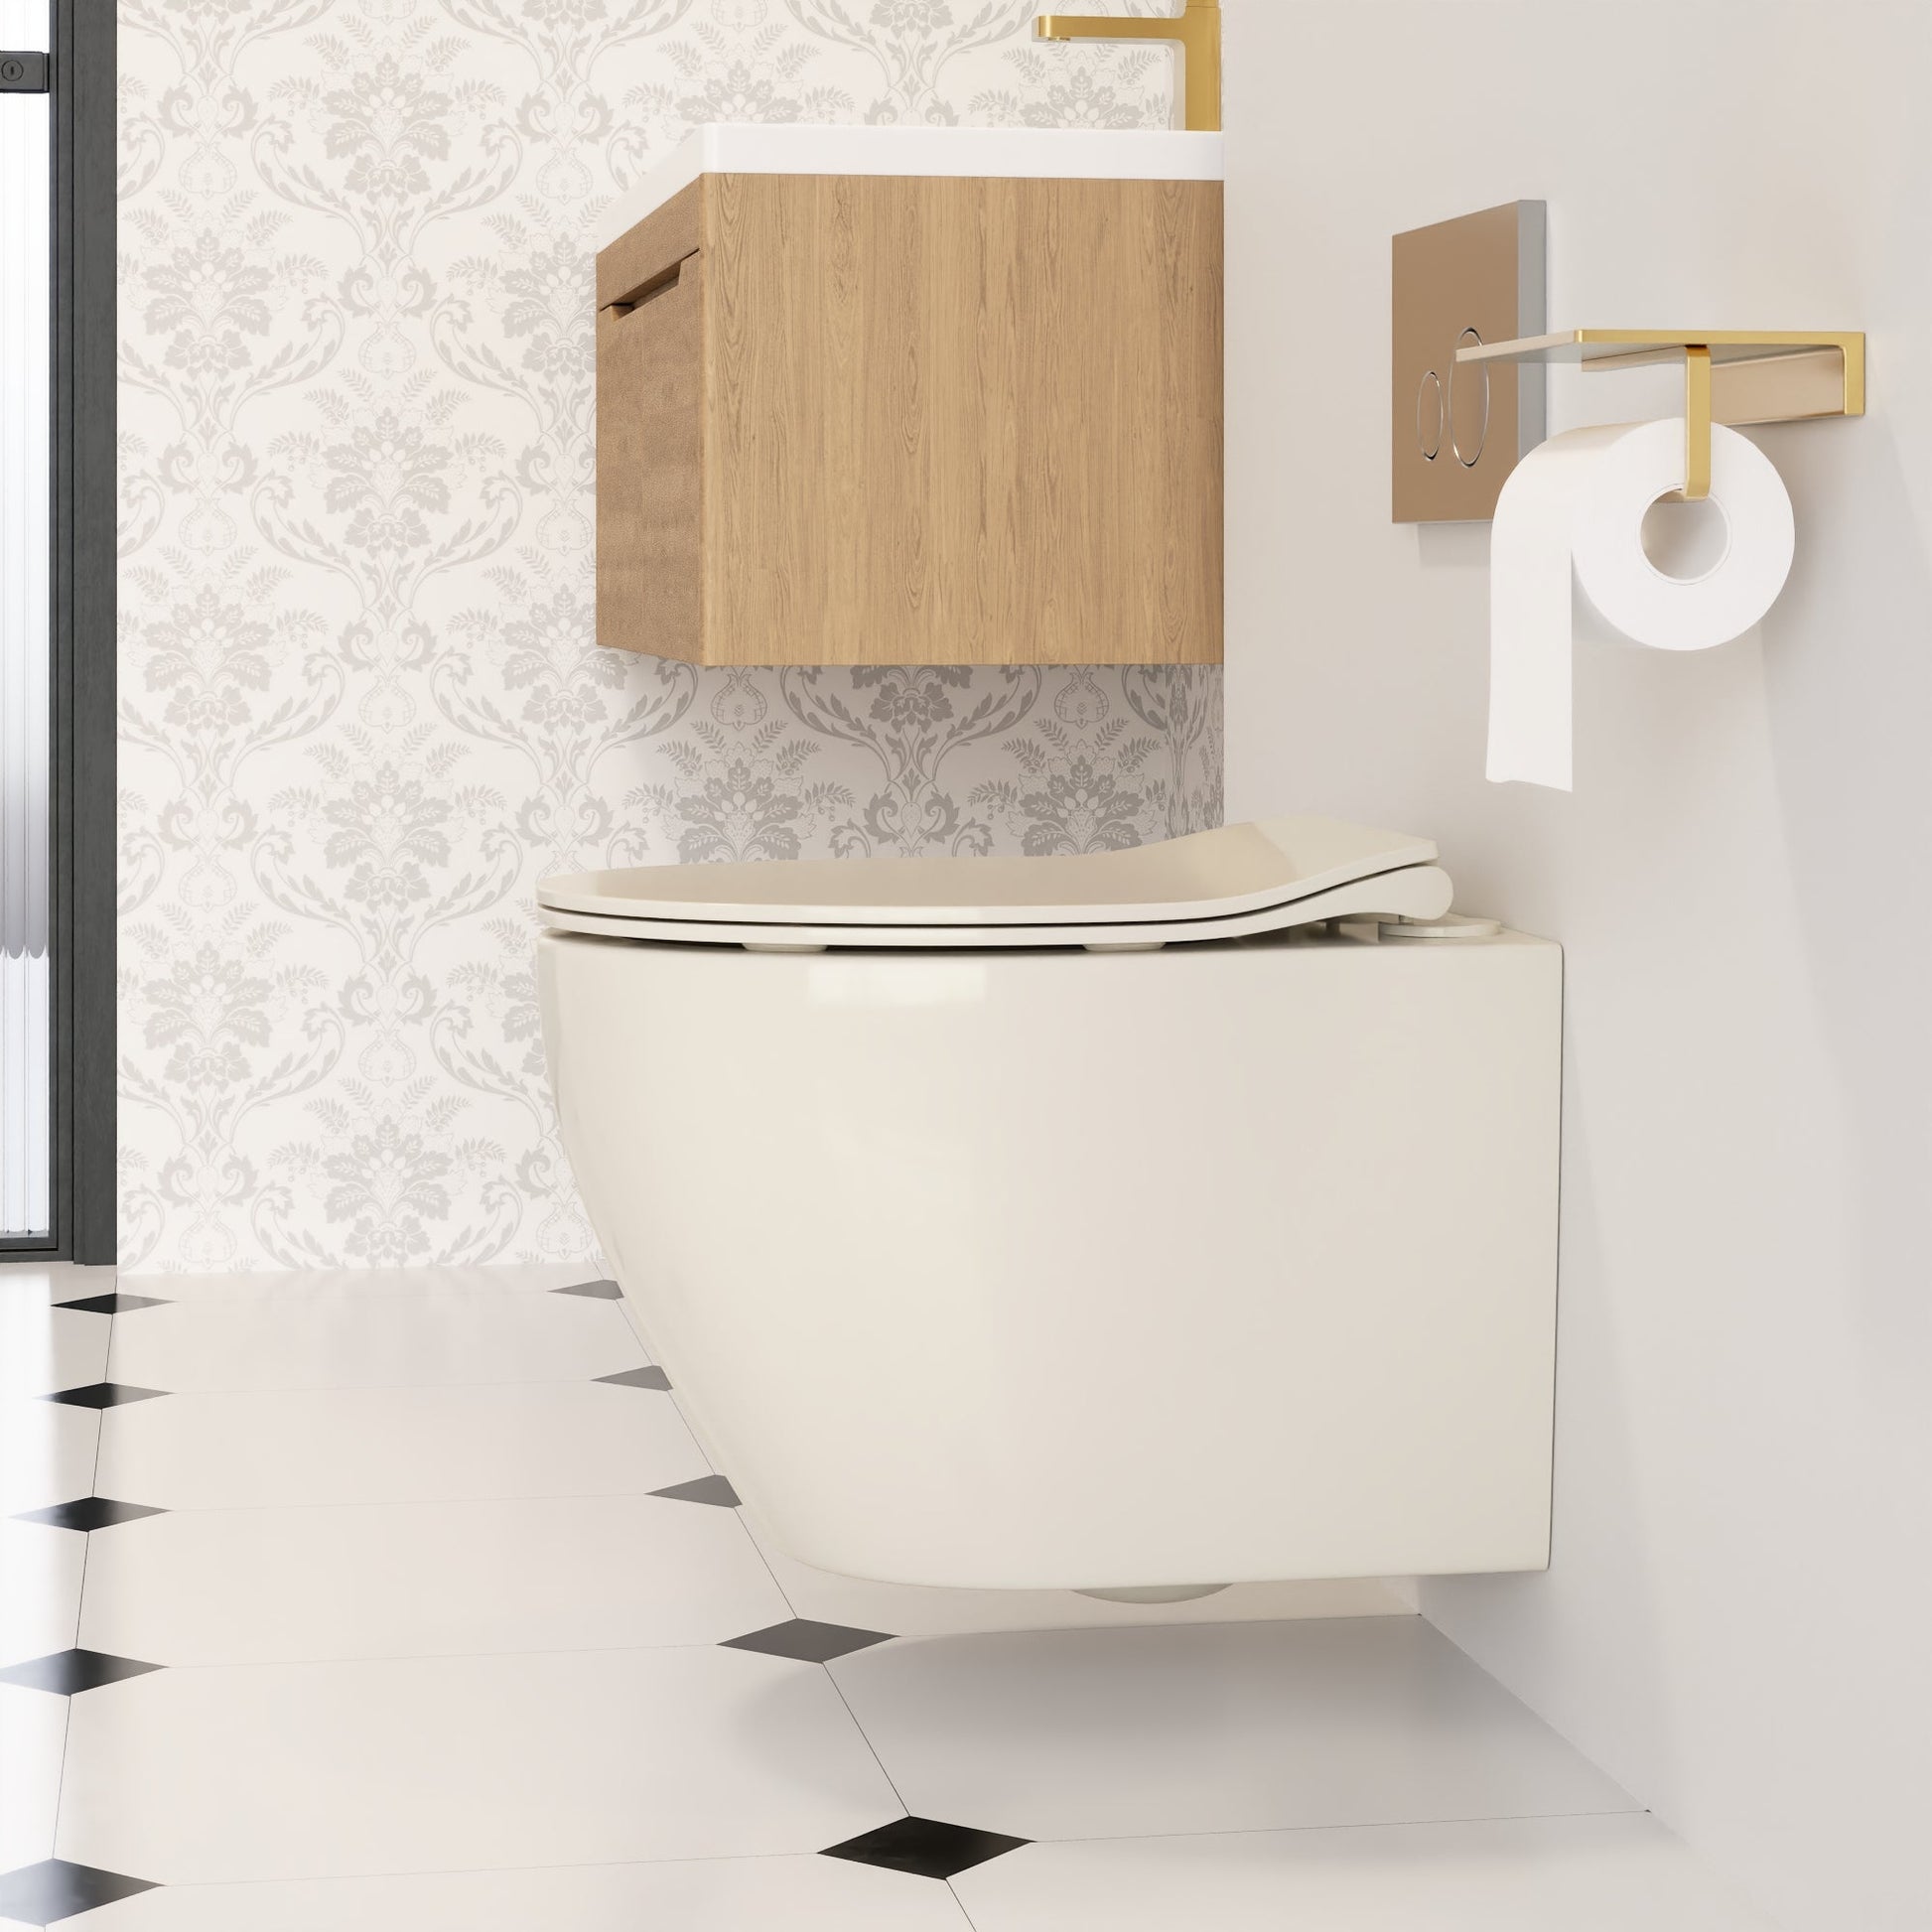 DeerValley Liberty 1.1/1.6GPF Dual-Flush Elongated Bone Wall-Mounted Toilet With Concealed In-Wall Toilet Tank